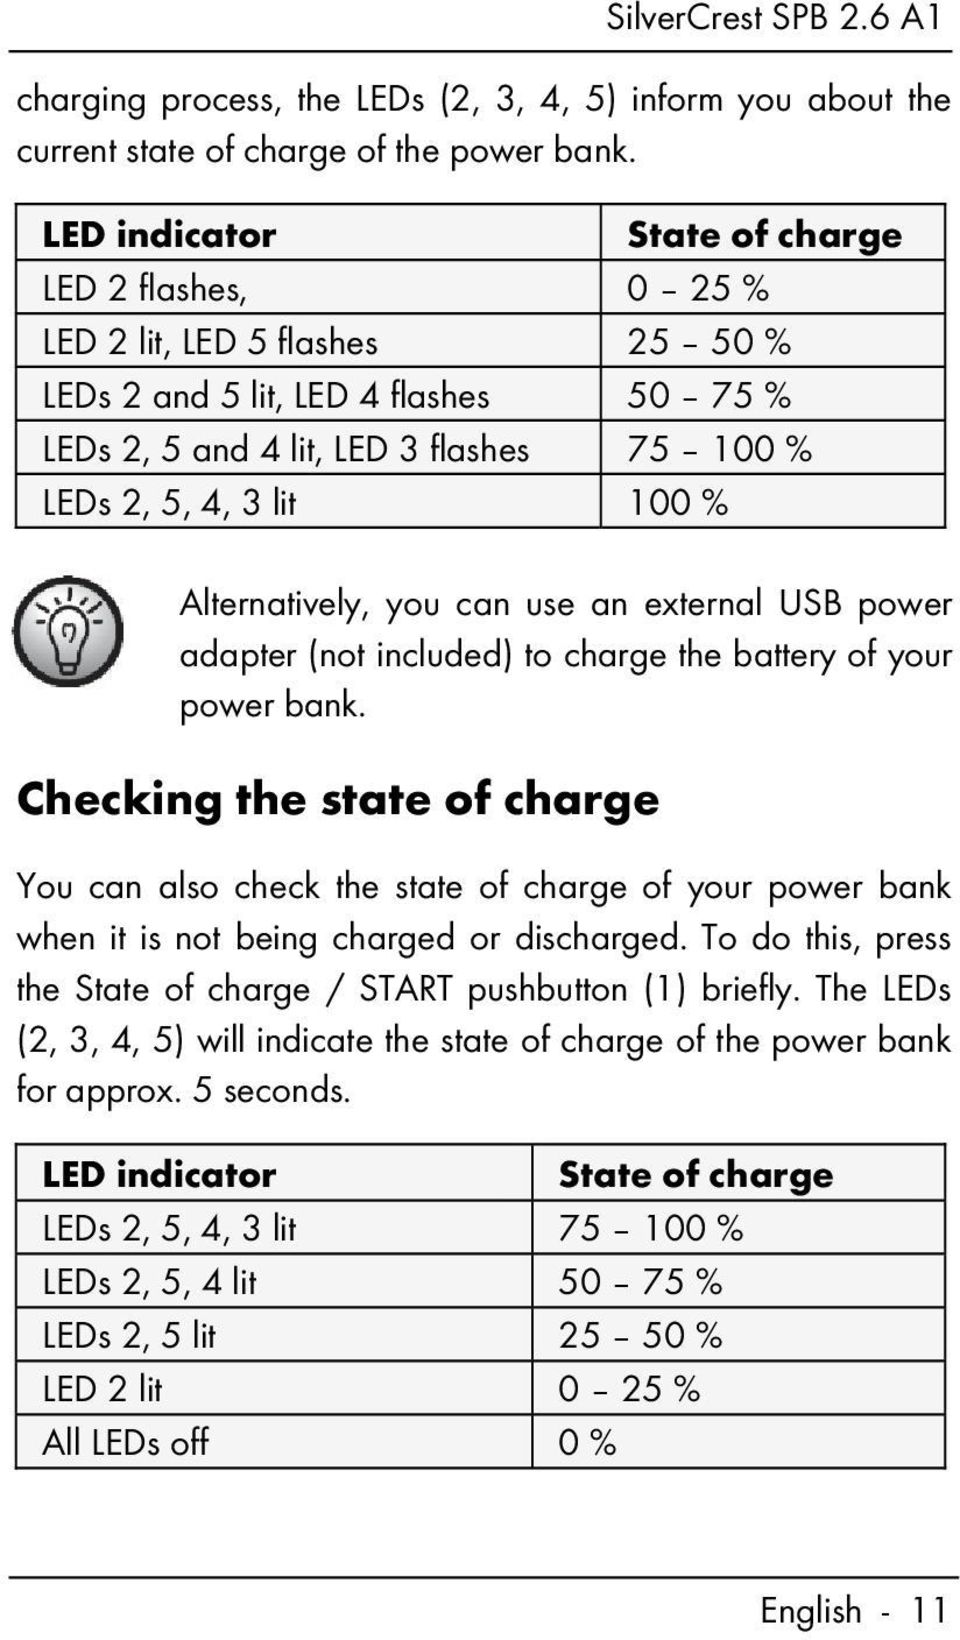 Alternatively, you can use an external USB power adapter (not included) to charge the battery of your power bank.